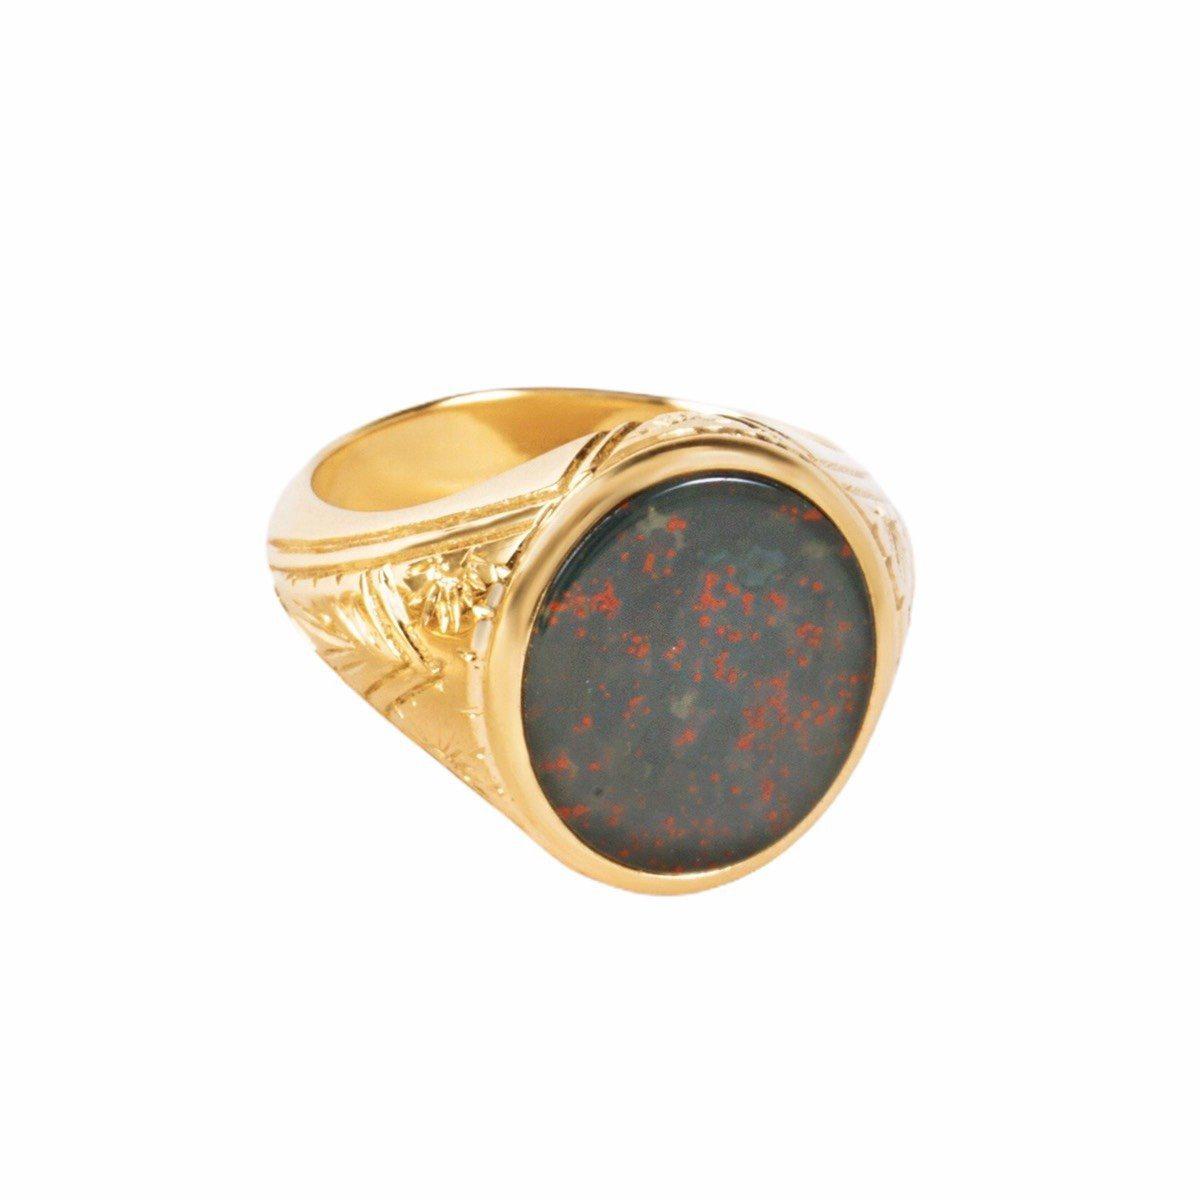 Bloodstone Lion Signet Ring - Gold plated Sterling Silver - The Regnas  Collection